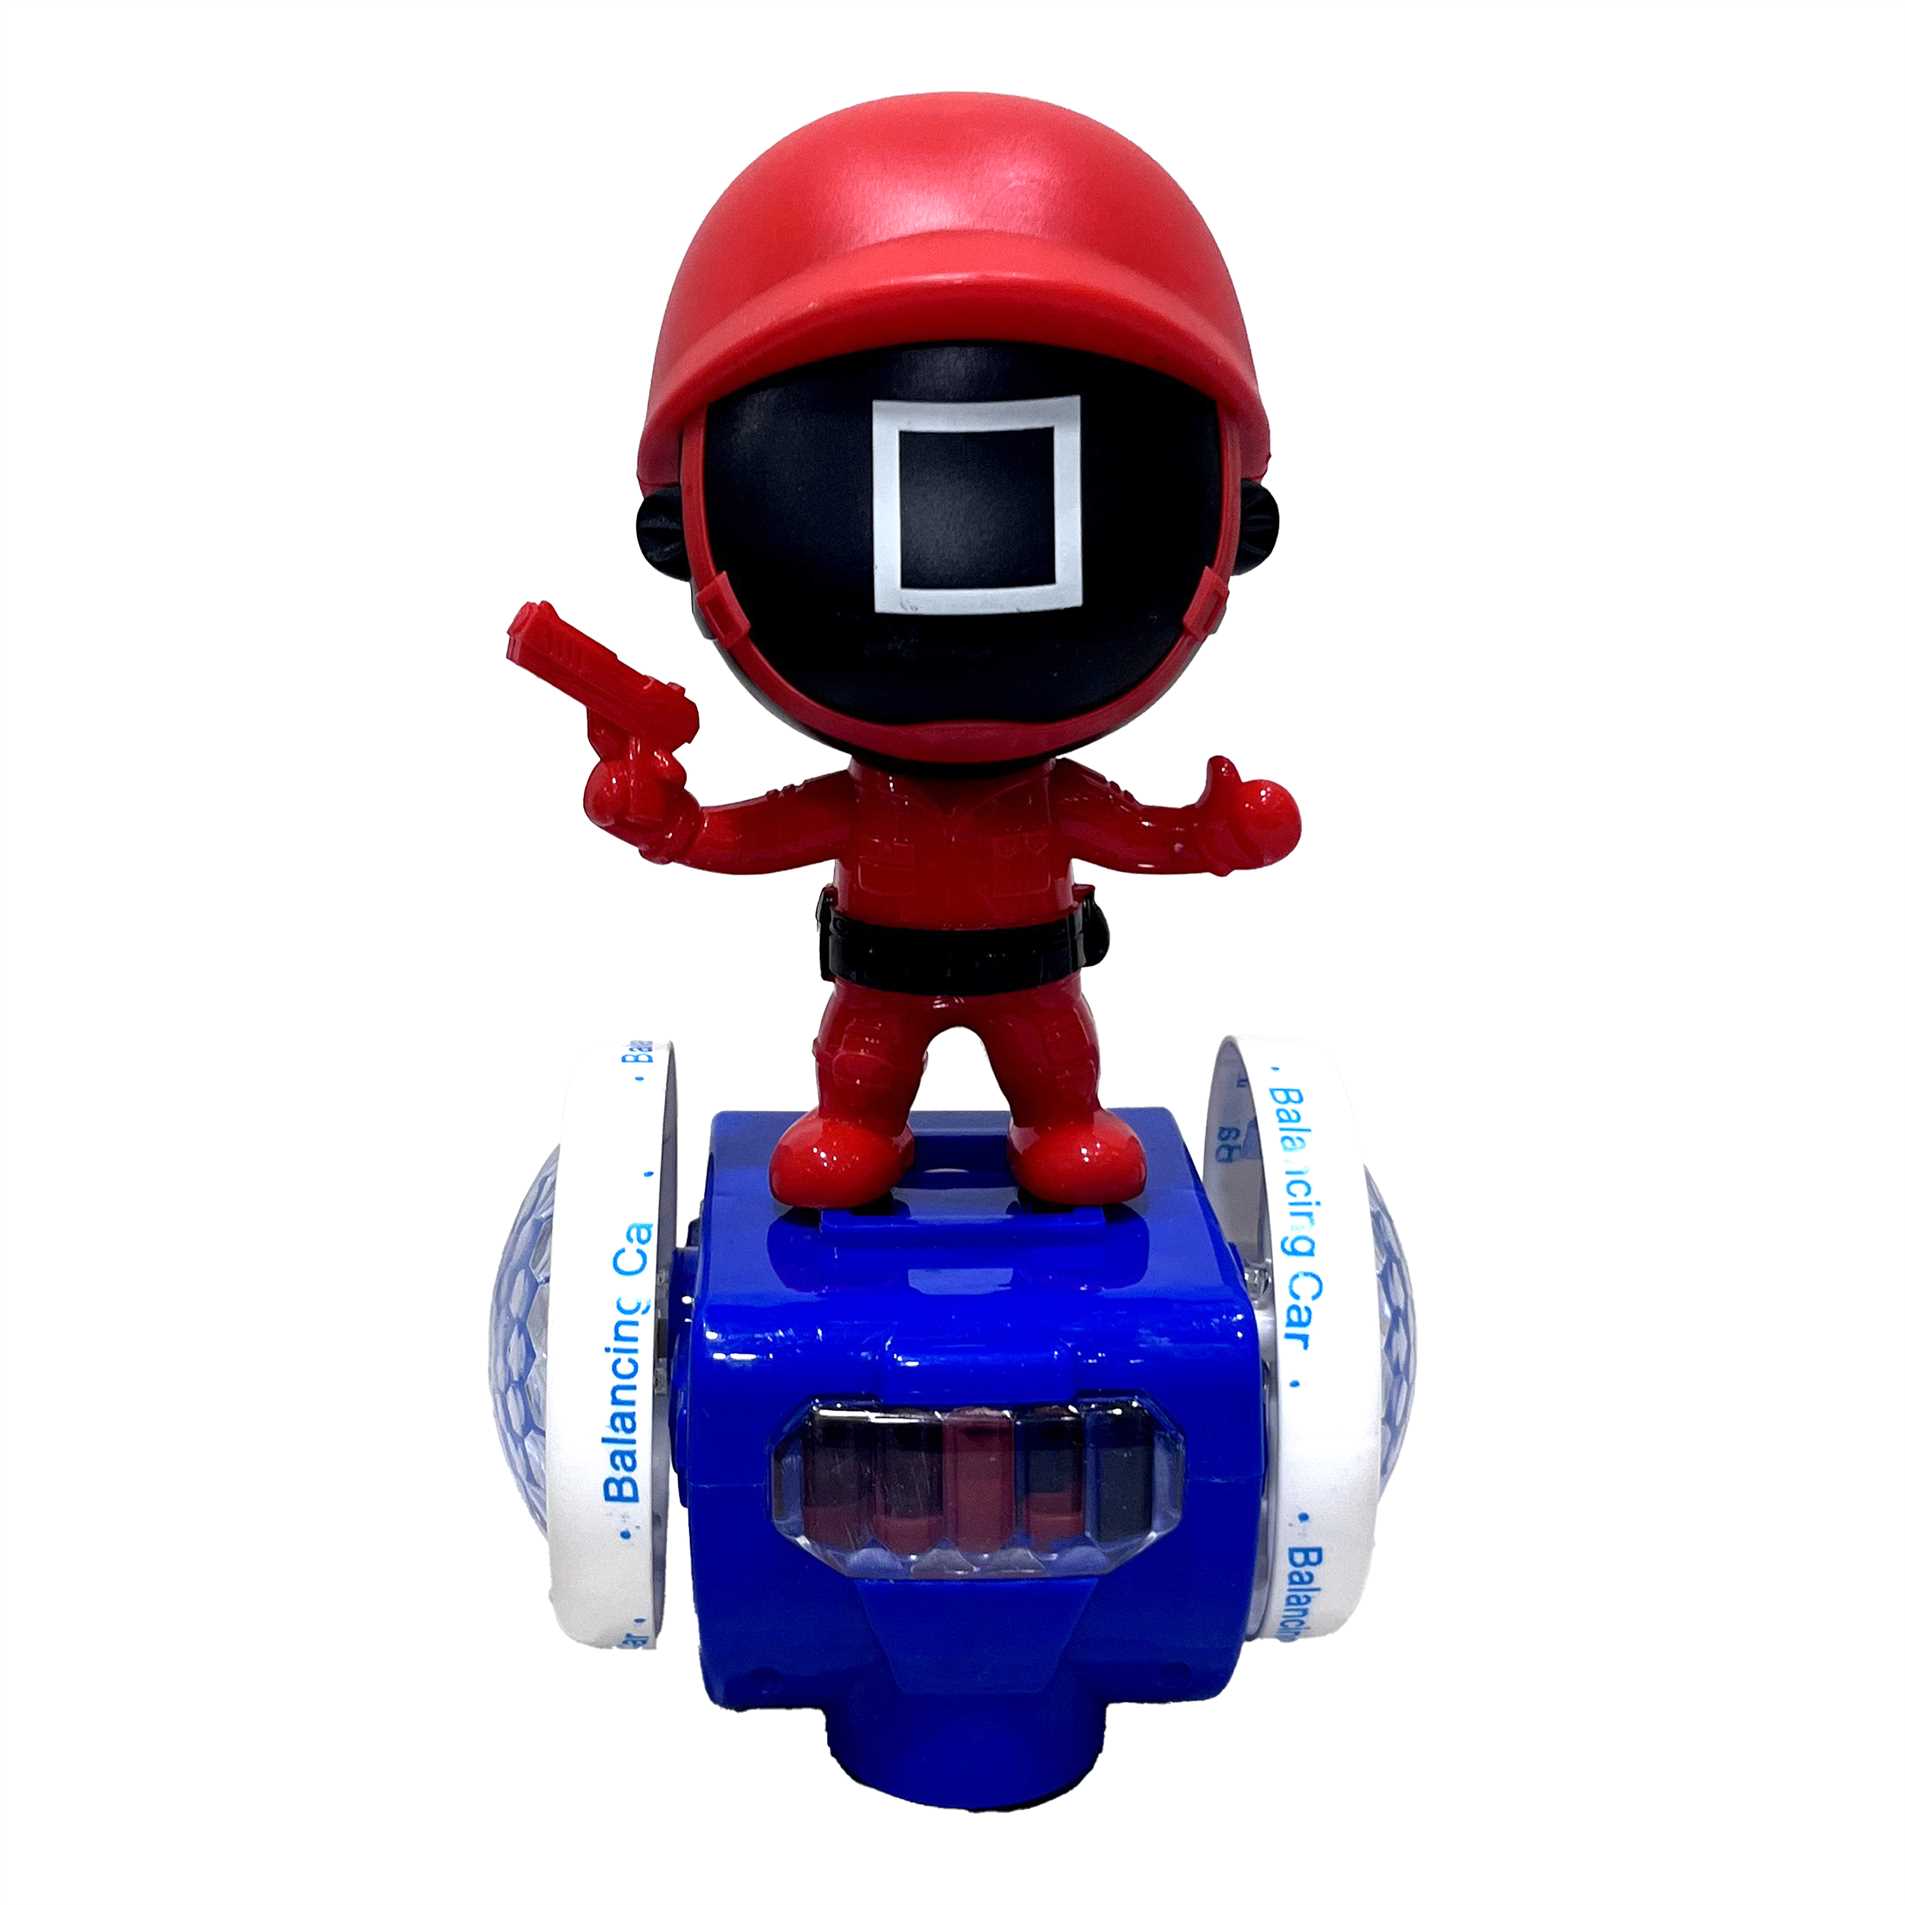 Buy Squid Game Hoverboard Battery Operated Toy Online in India